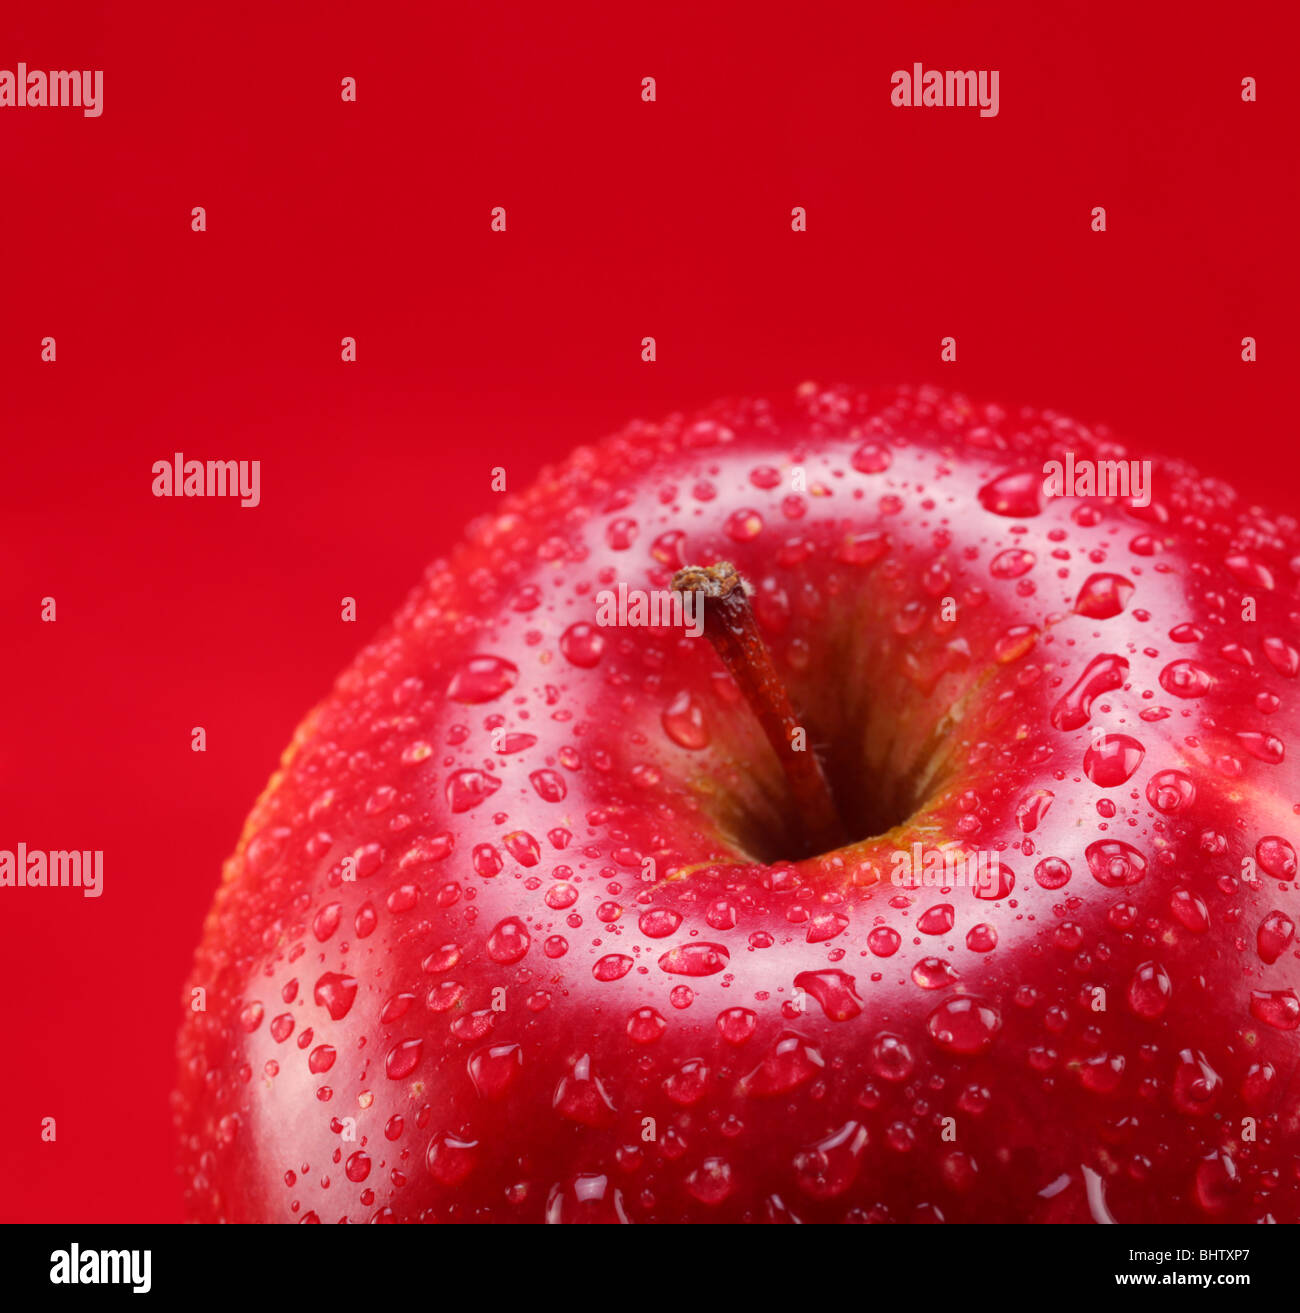 Red apple with leaf on a red background Stock Photo